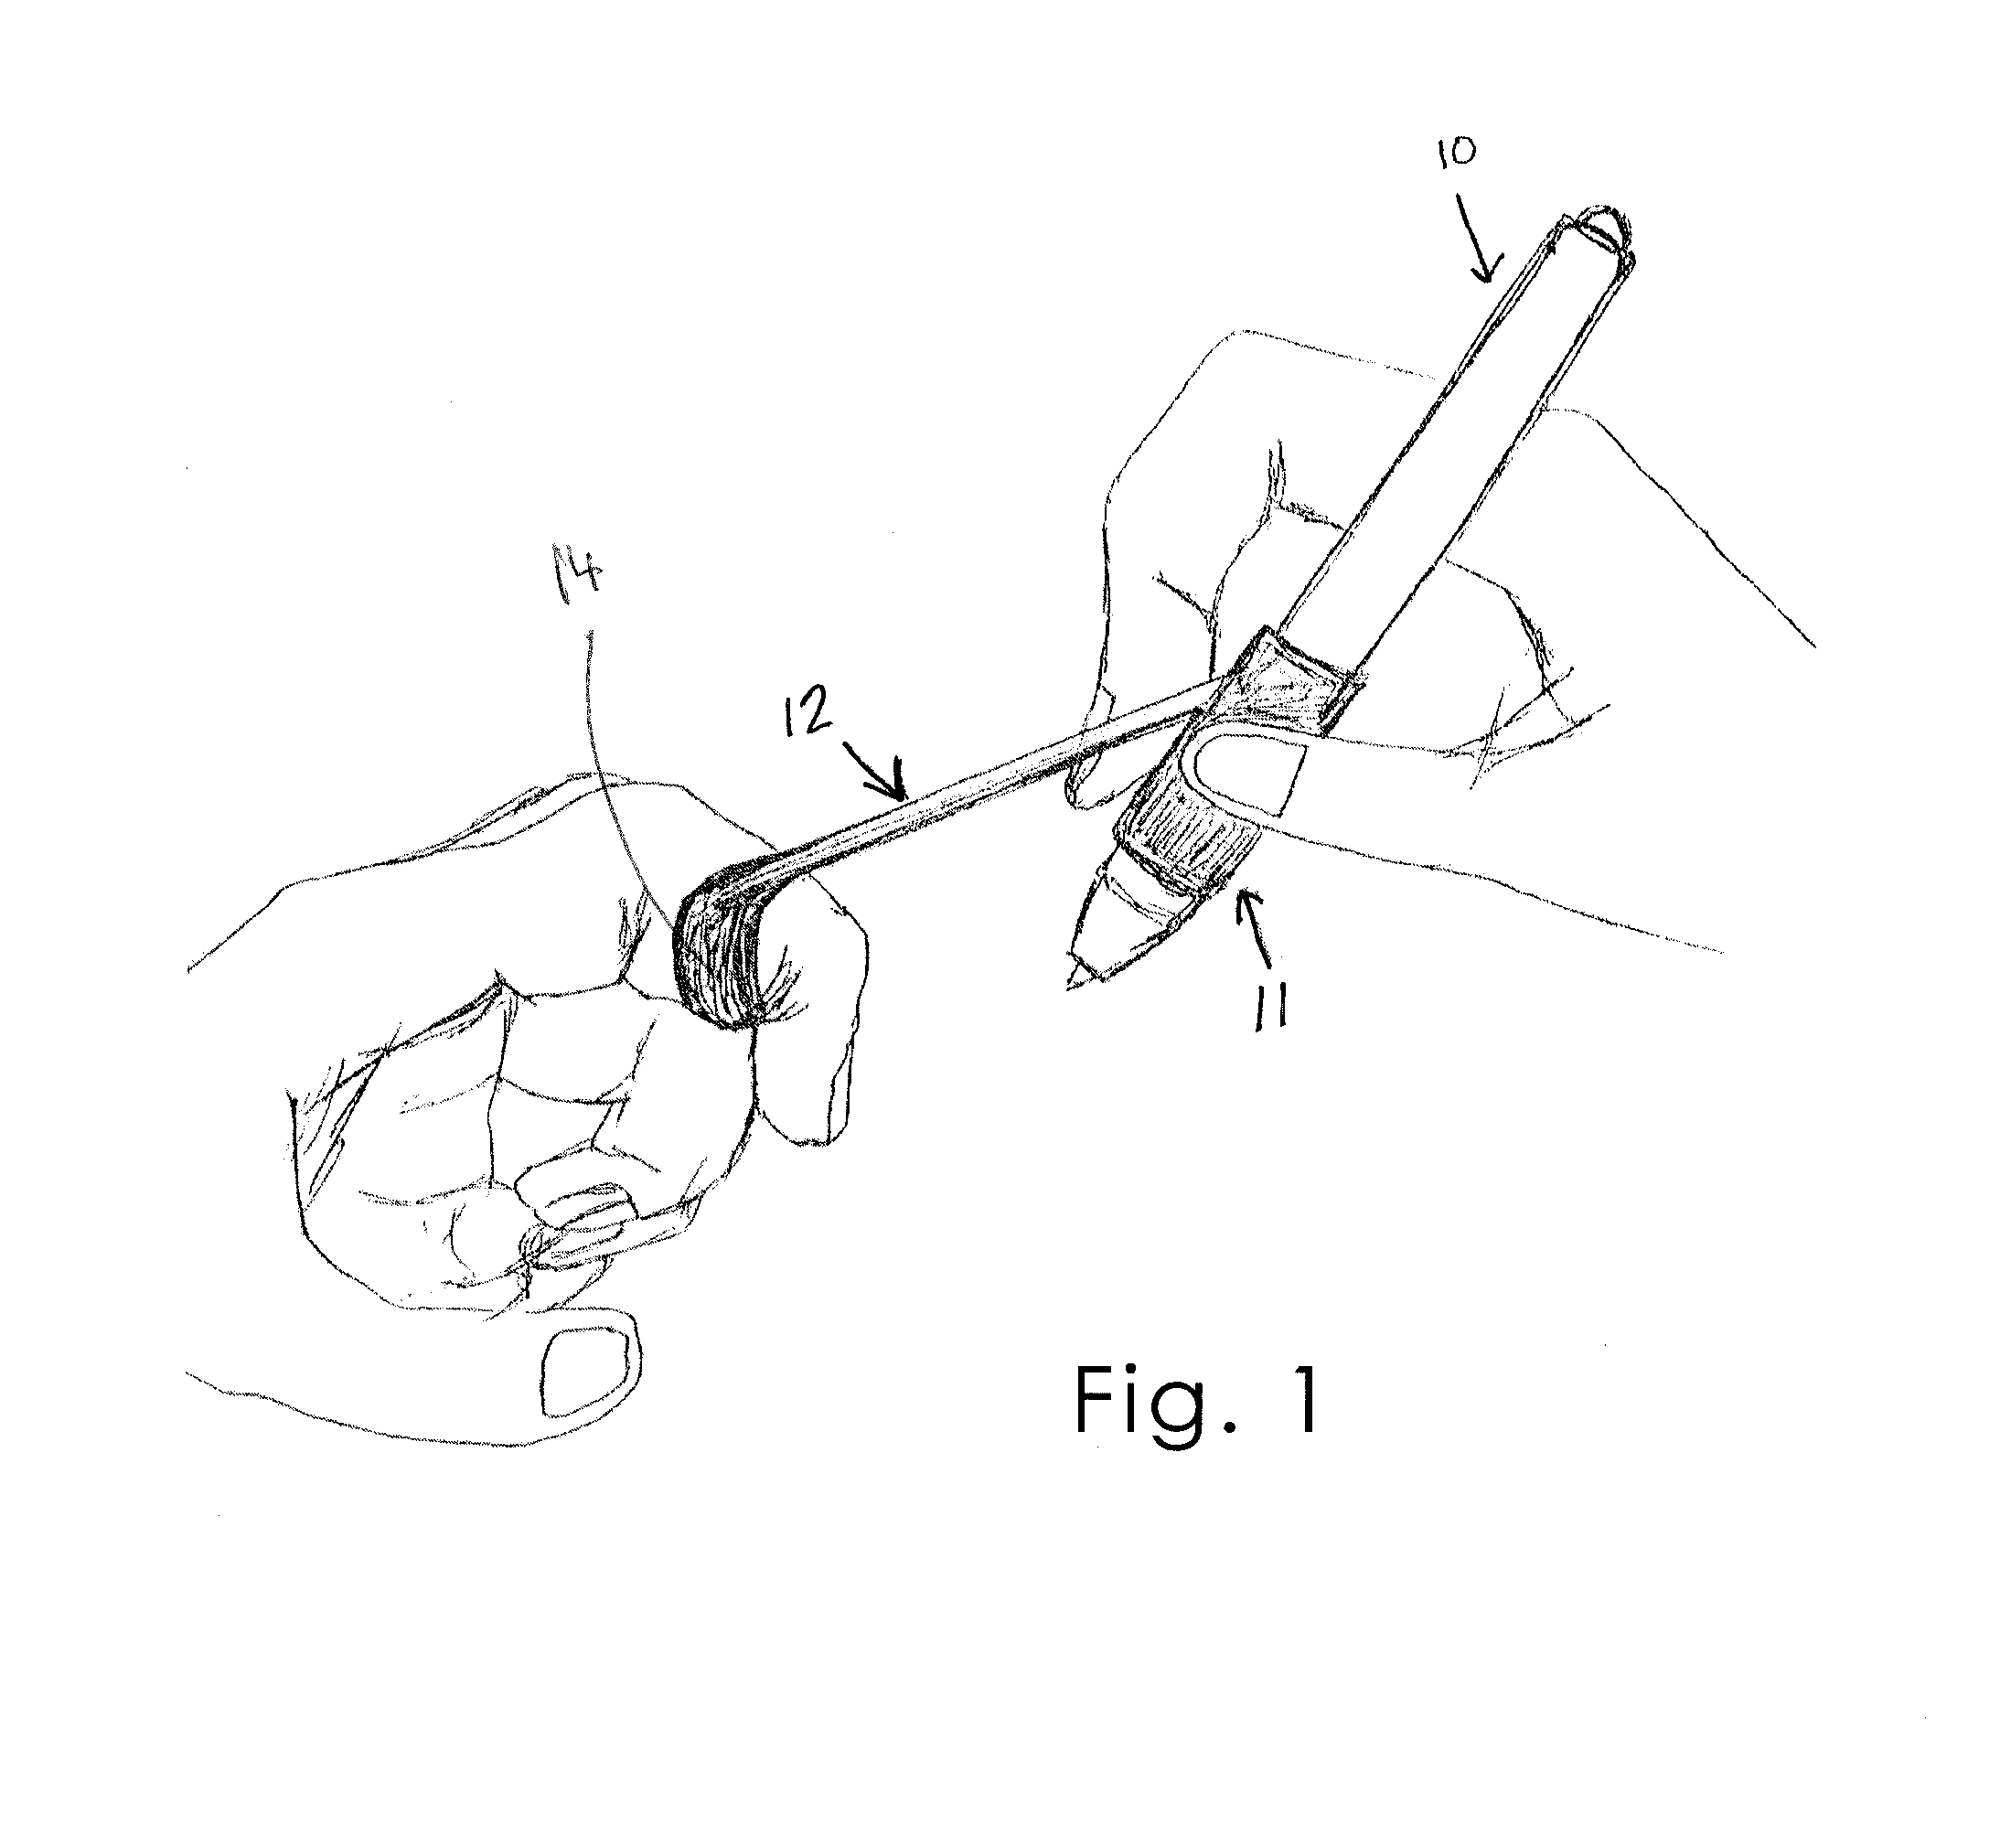 Attention Enhancing Writing Instrument Accessory and Method of Use